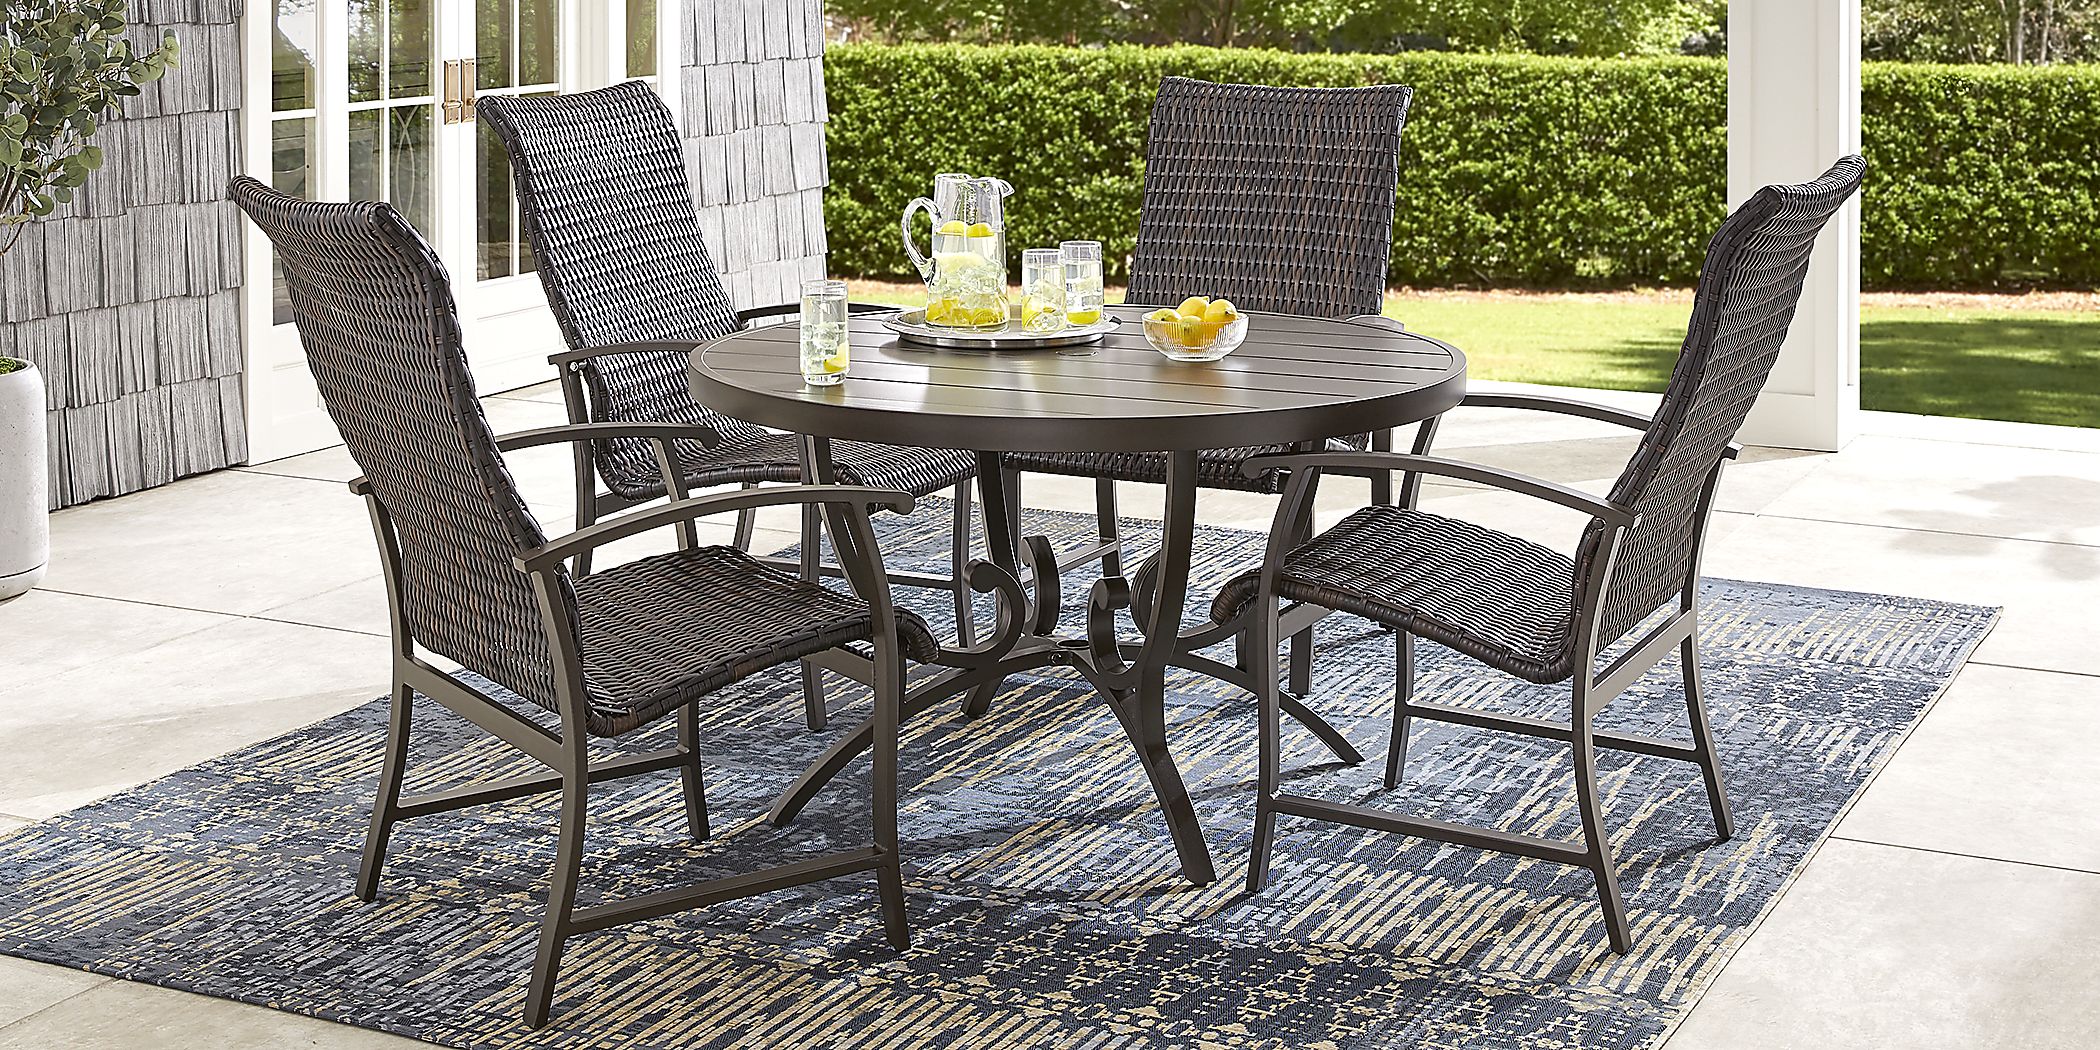 Bermuda Breeze Aged Bronze 5 Pc Round Outdoor Dining Set with Wicker Chairs